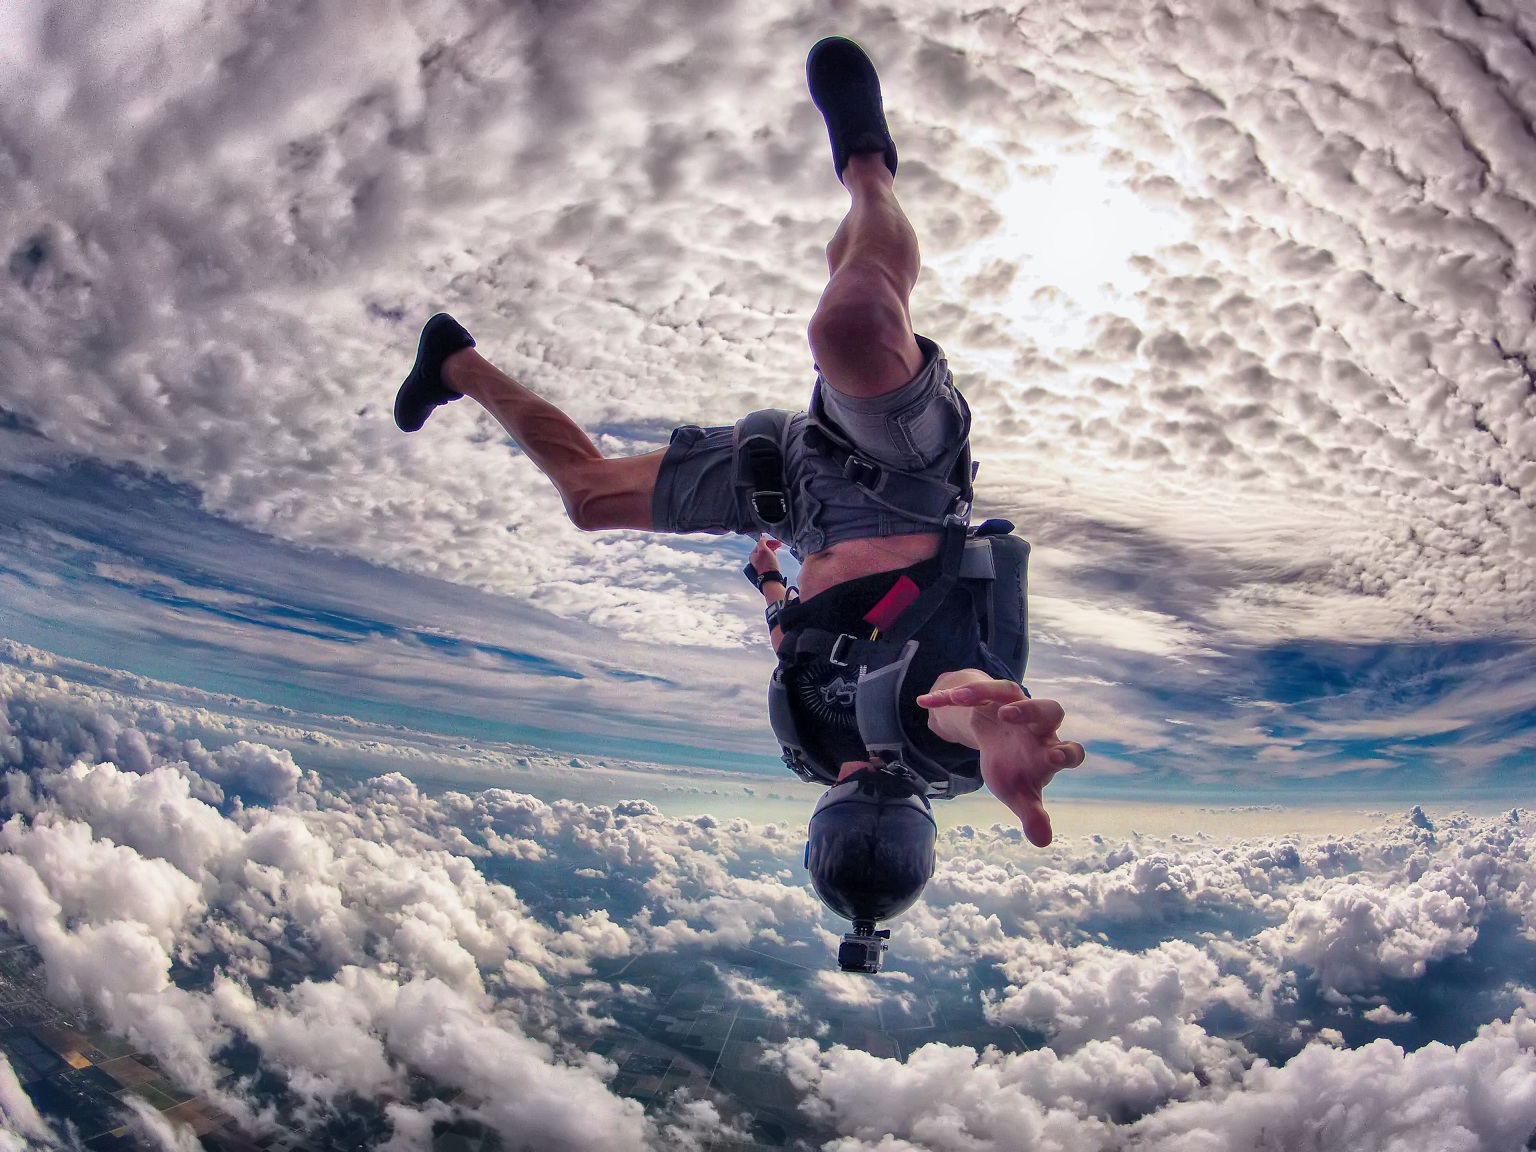 skydive, Fall, Clouds, Extreme, Sports, People, Men, Males, Wind, Landscapes, Flight, Camera Wallpaper